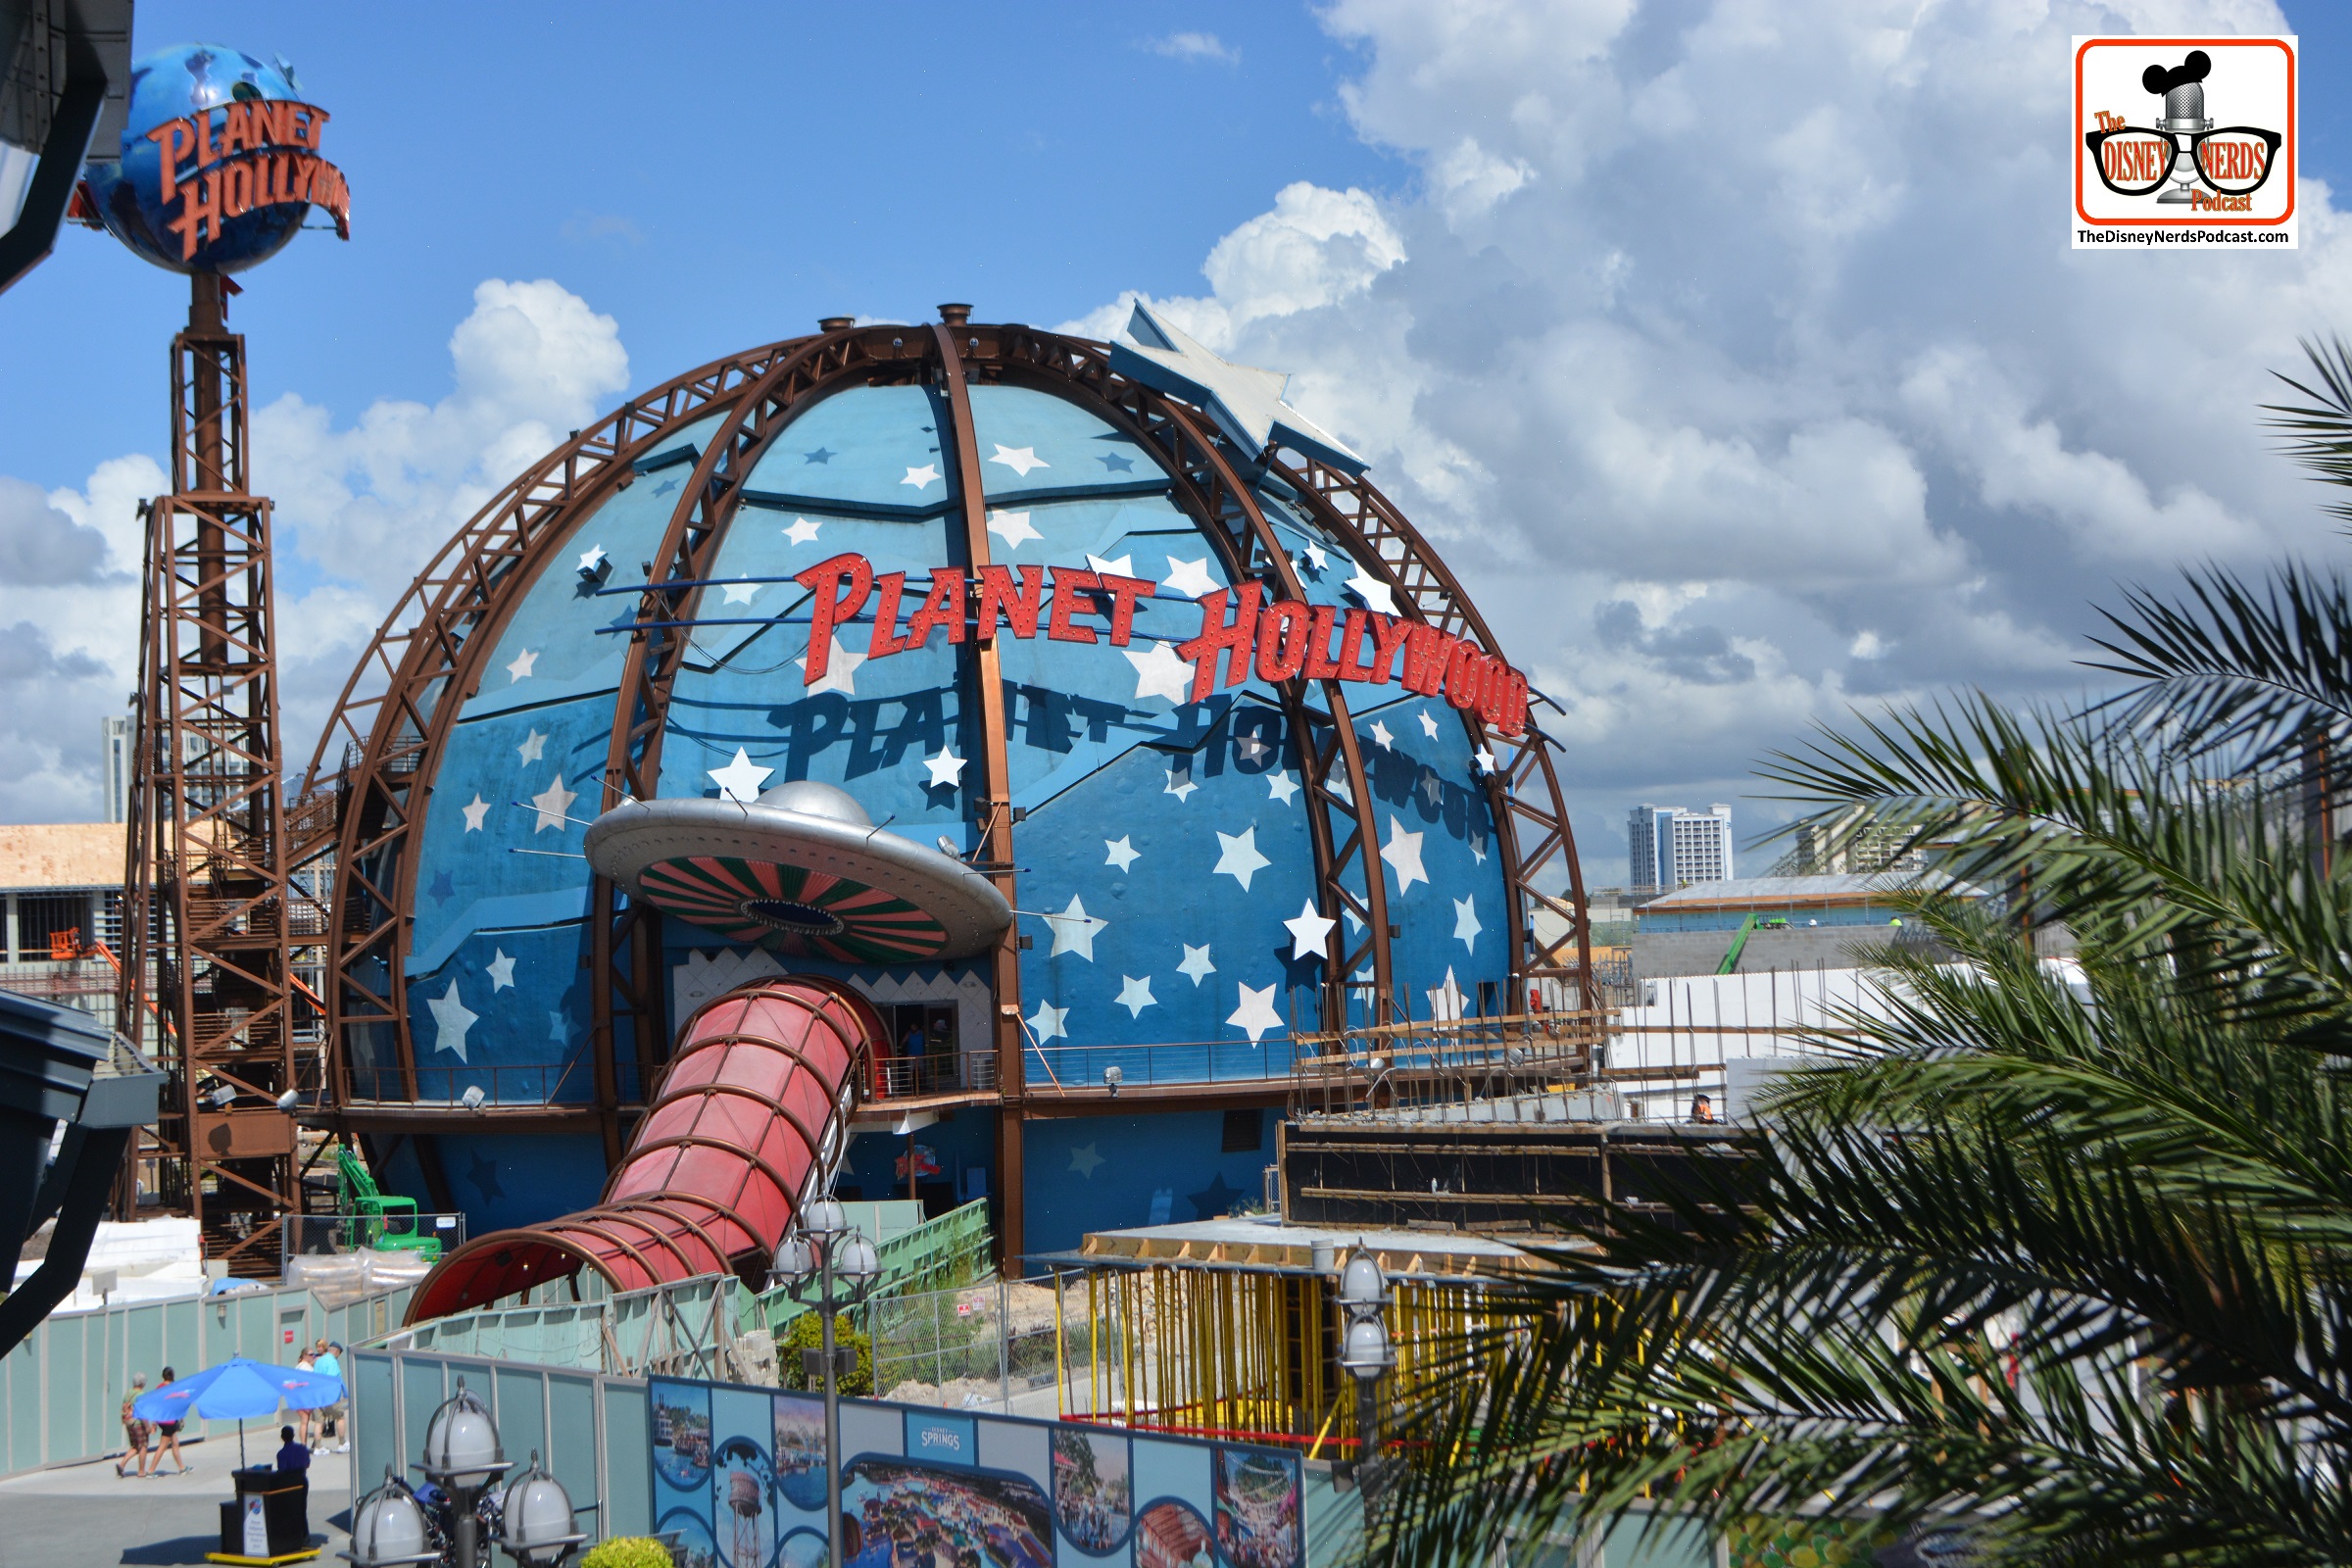 Planet Hollywood, the facade should change soon...